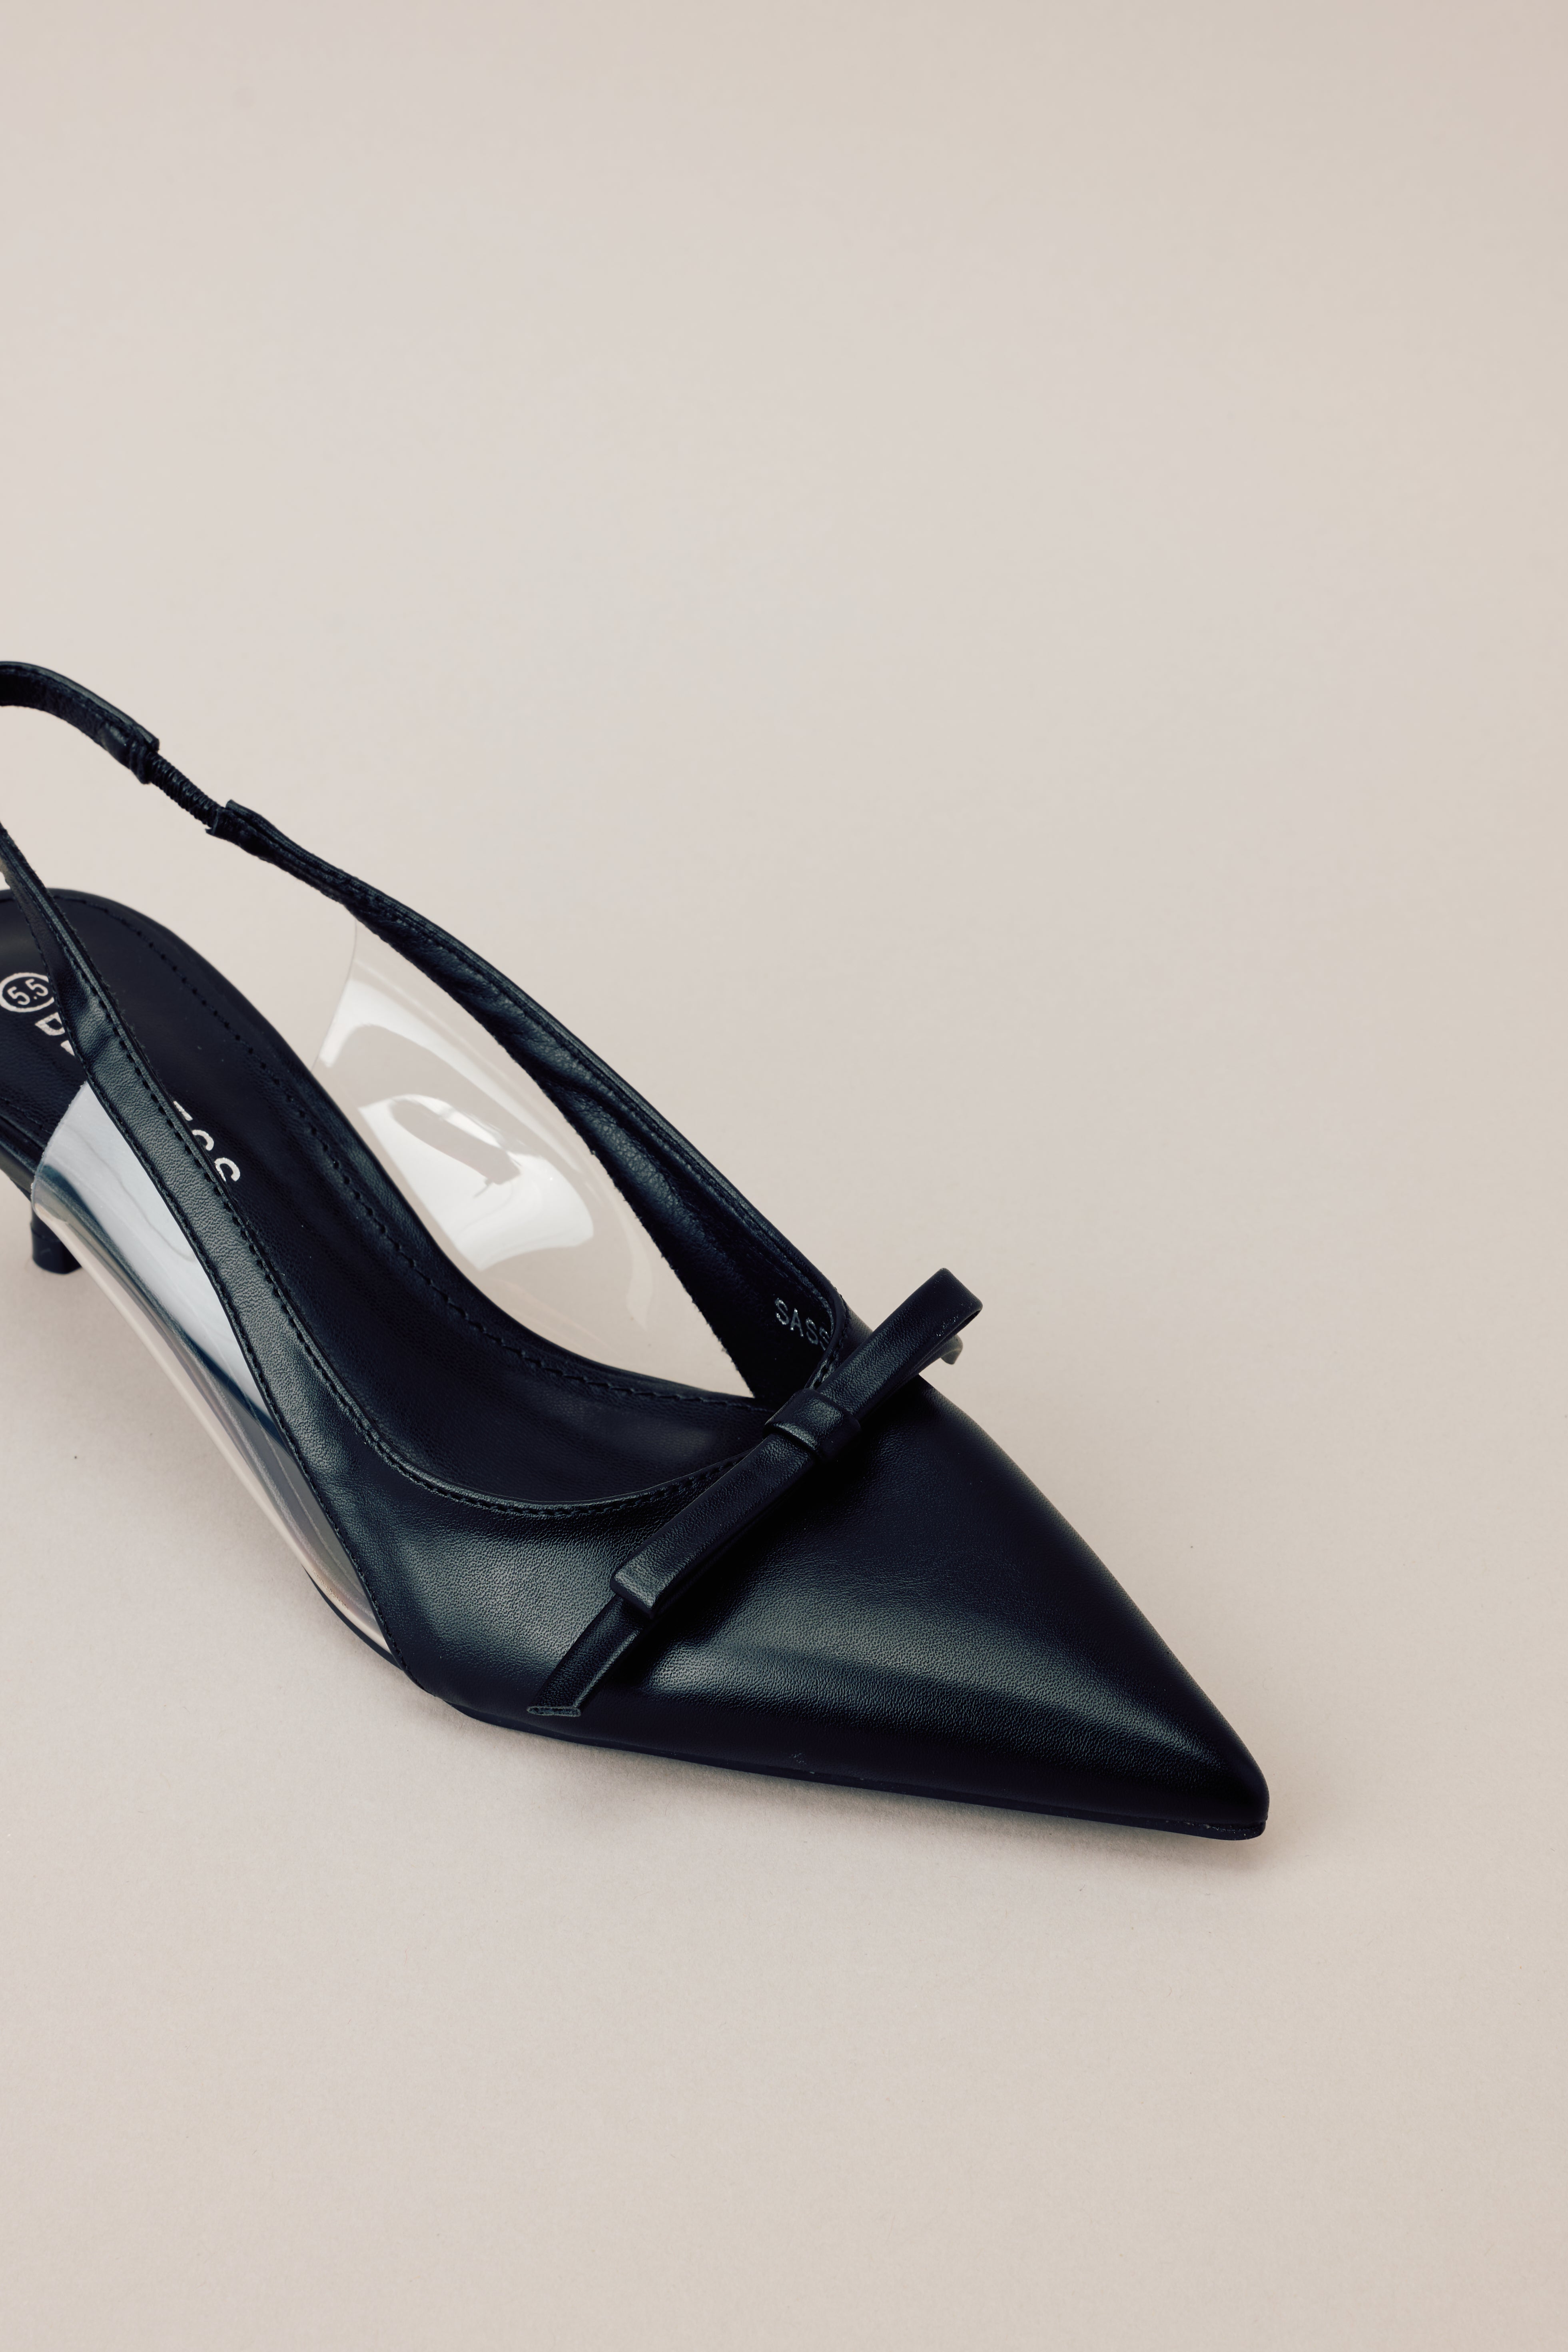 Close-up of the black kitten heels showing the pointed closed toe, delicate bow detailing, and clear siding for extra support.